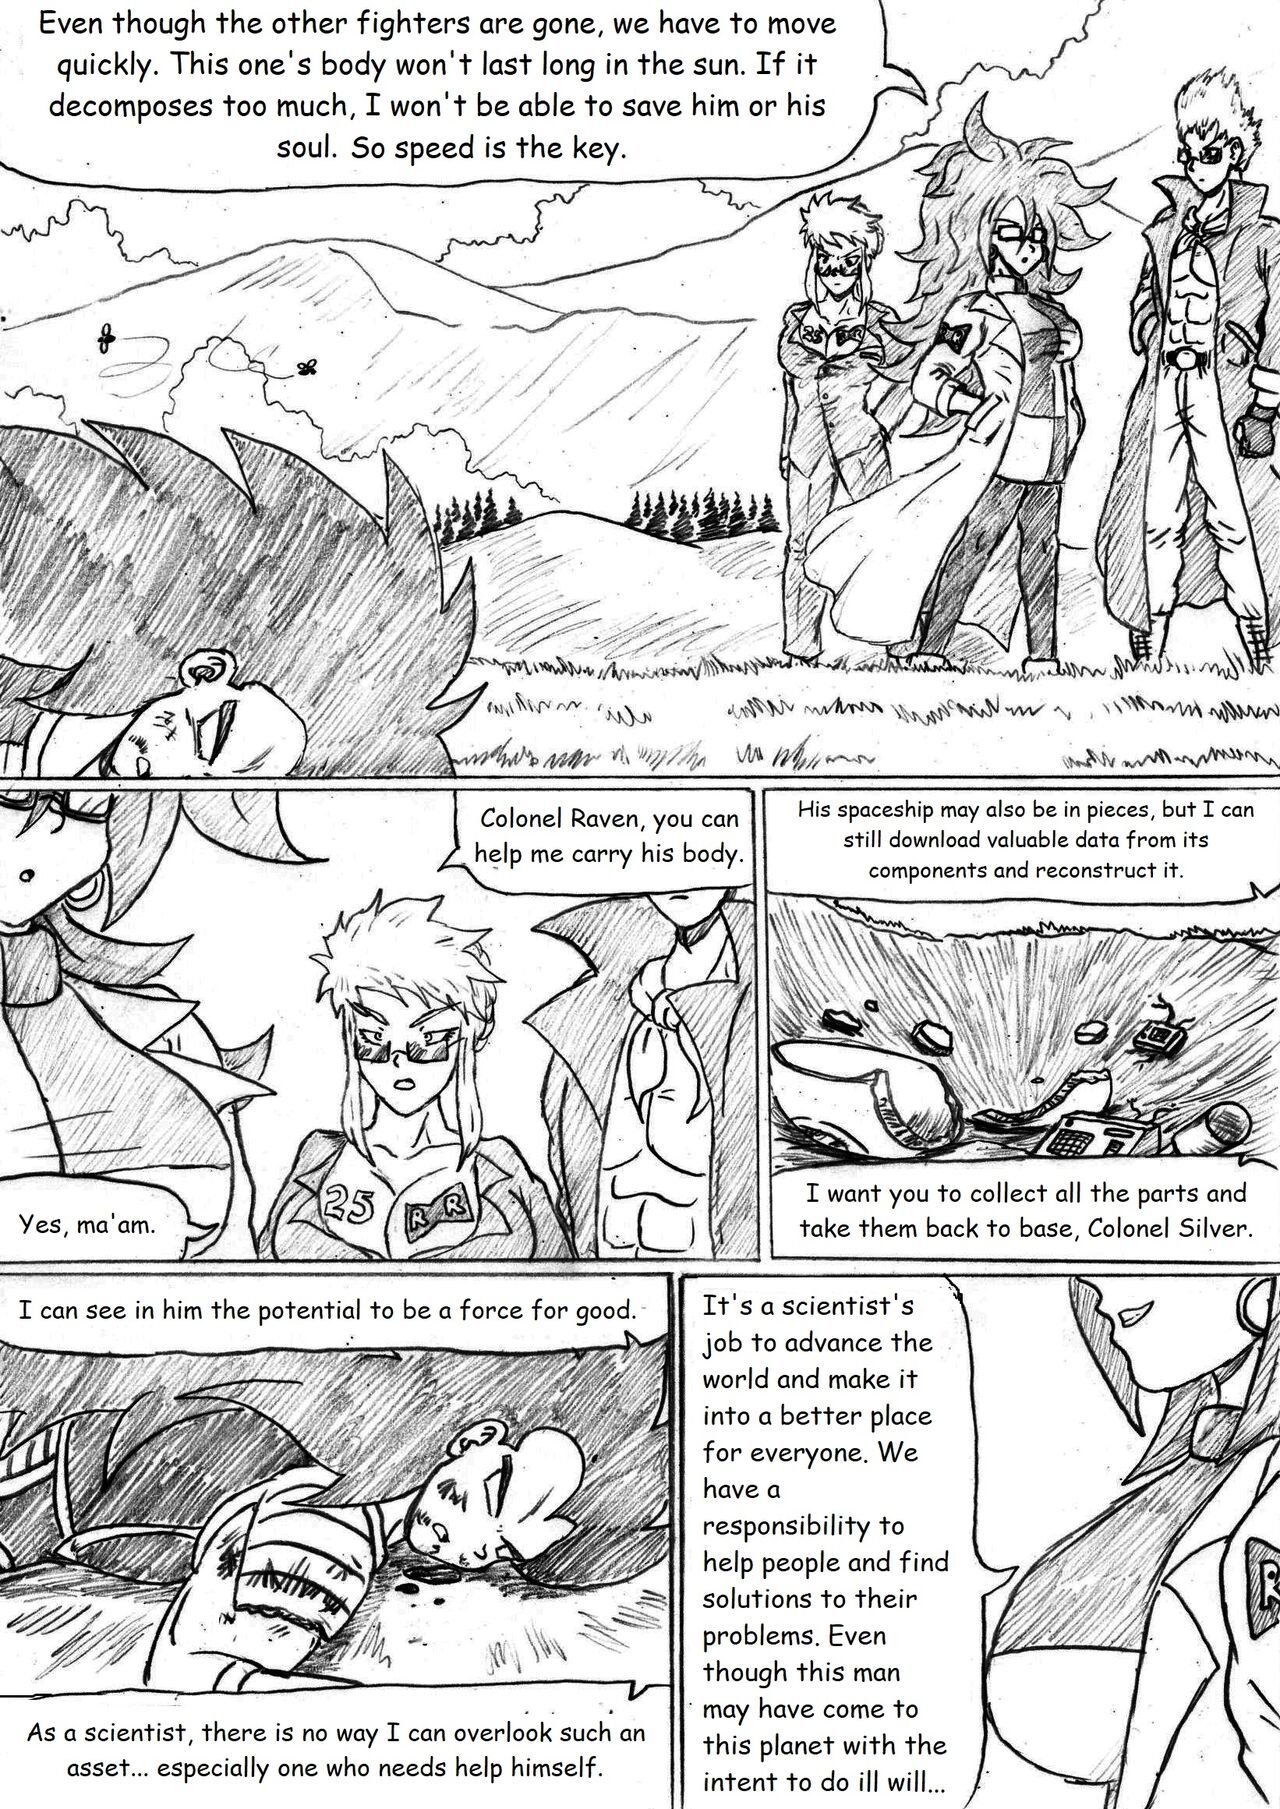 [TheWriteFiction] Dragonball Z Golden Age - Chapter 5 - Teamwork (Ongoing) 4